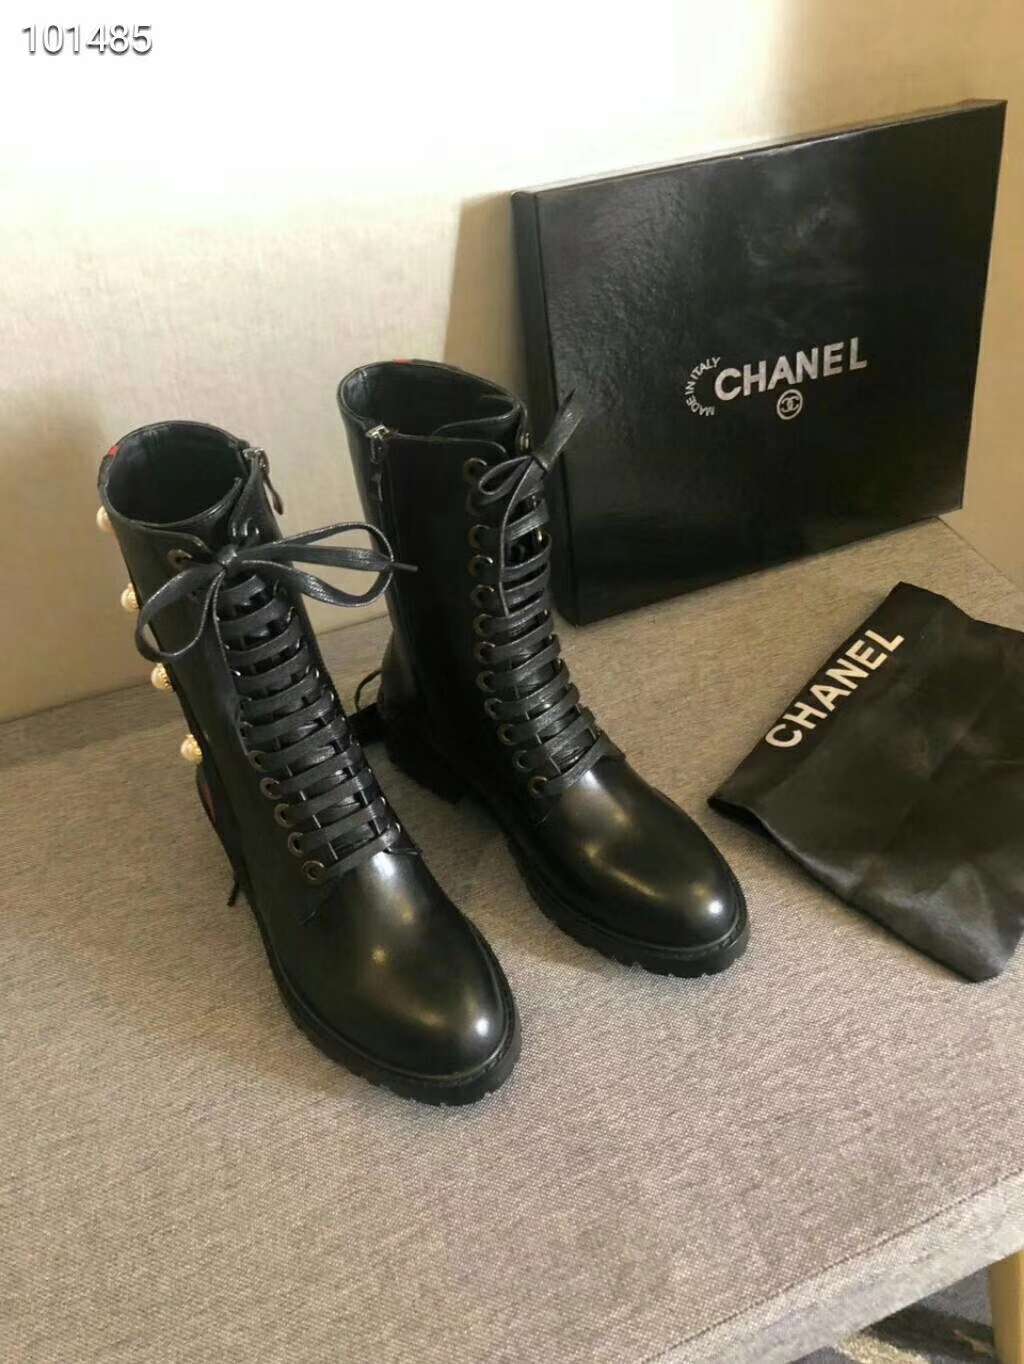 2019 NEW Chanel Real leather shoes CHANEL 101485 BLACK